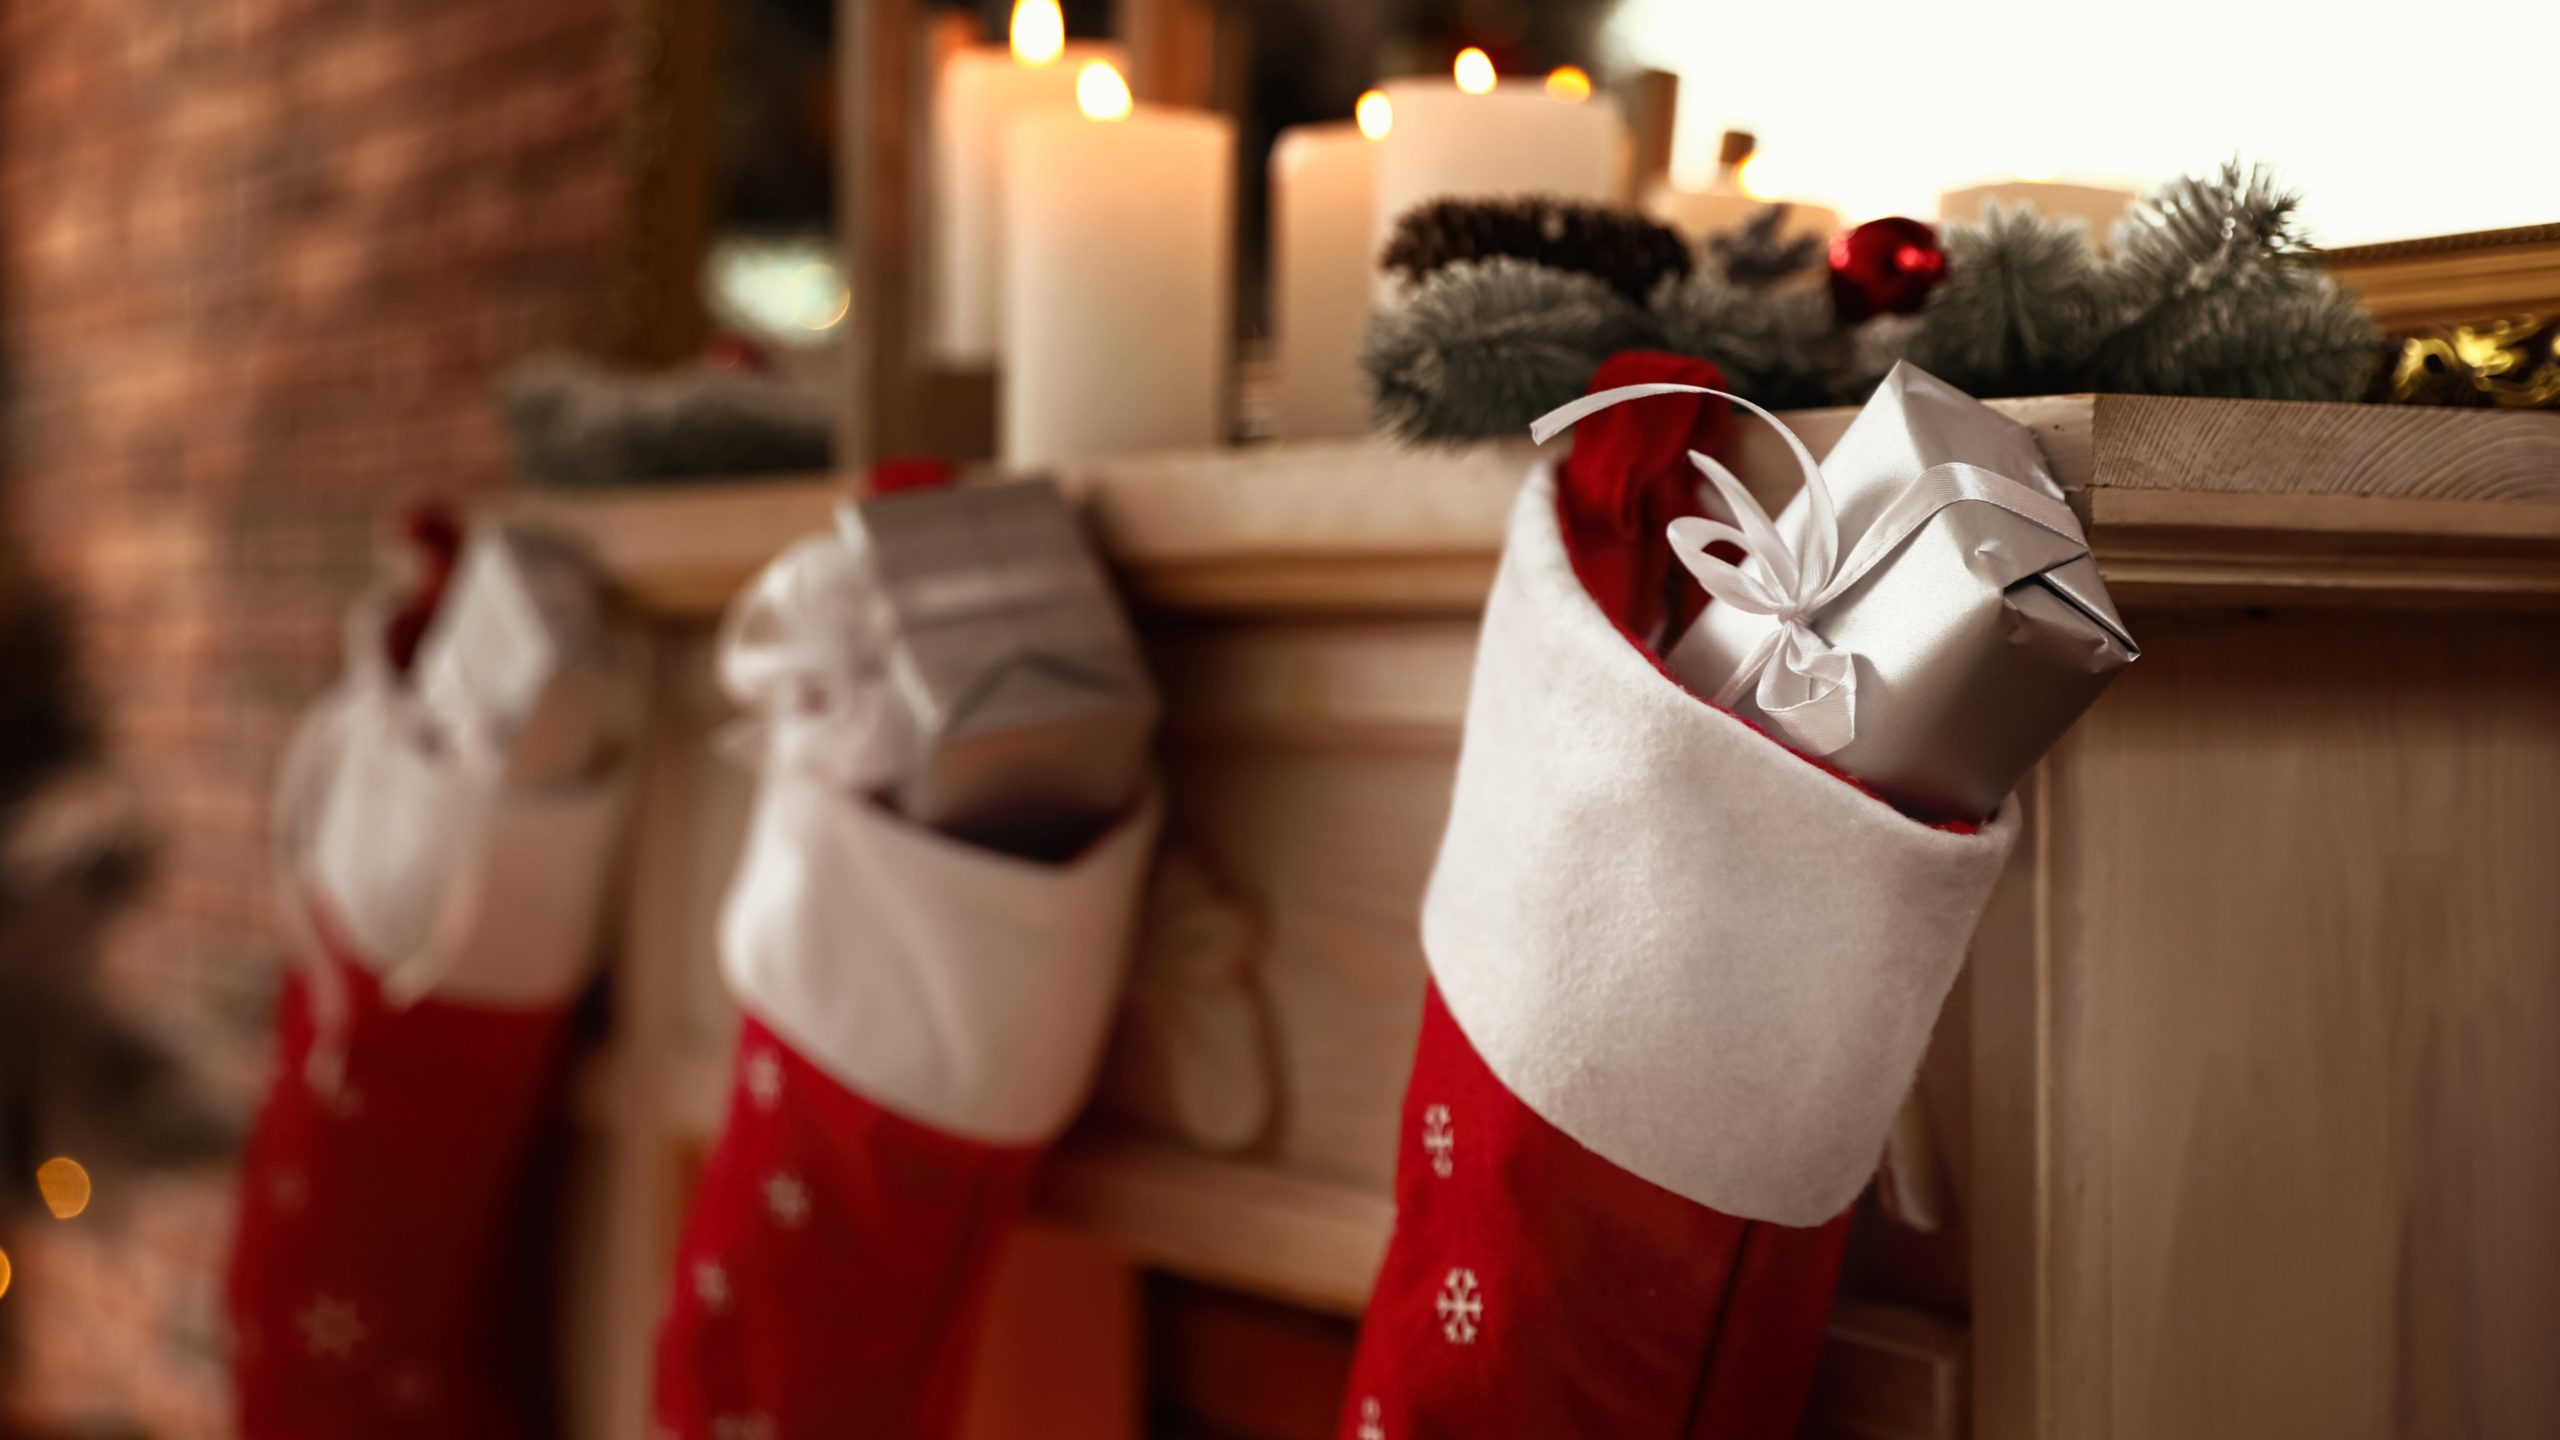 The Lazy Way to Stuff a Stocking That Doesn’t Look Lazy